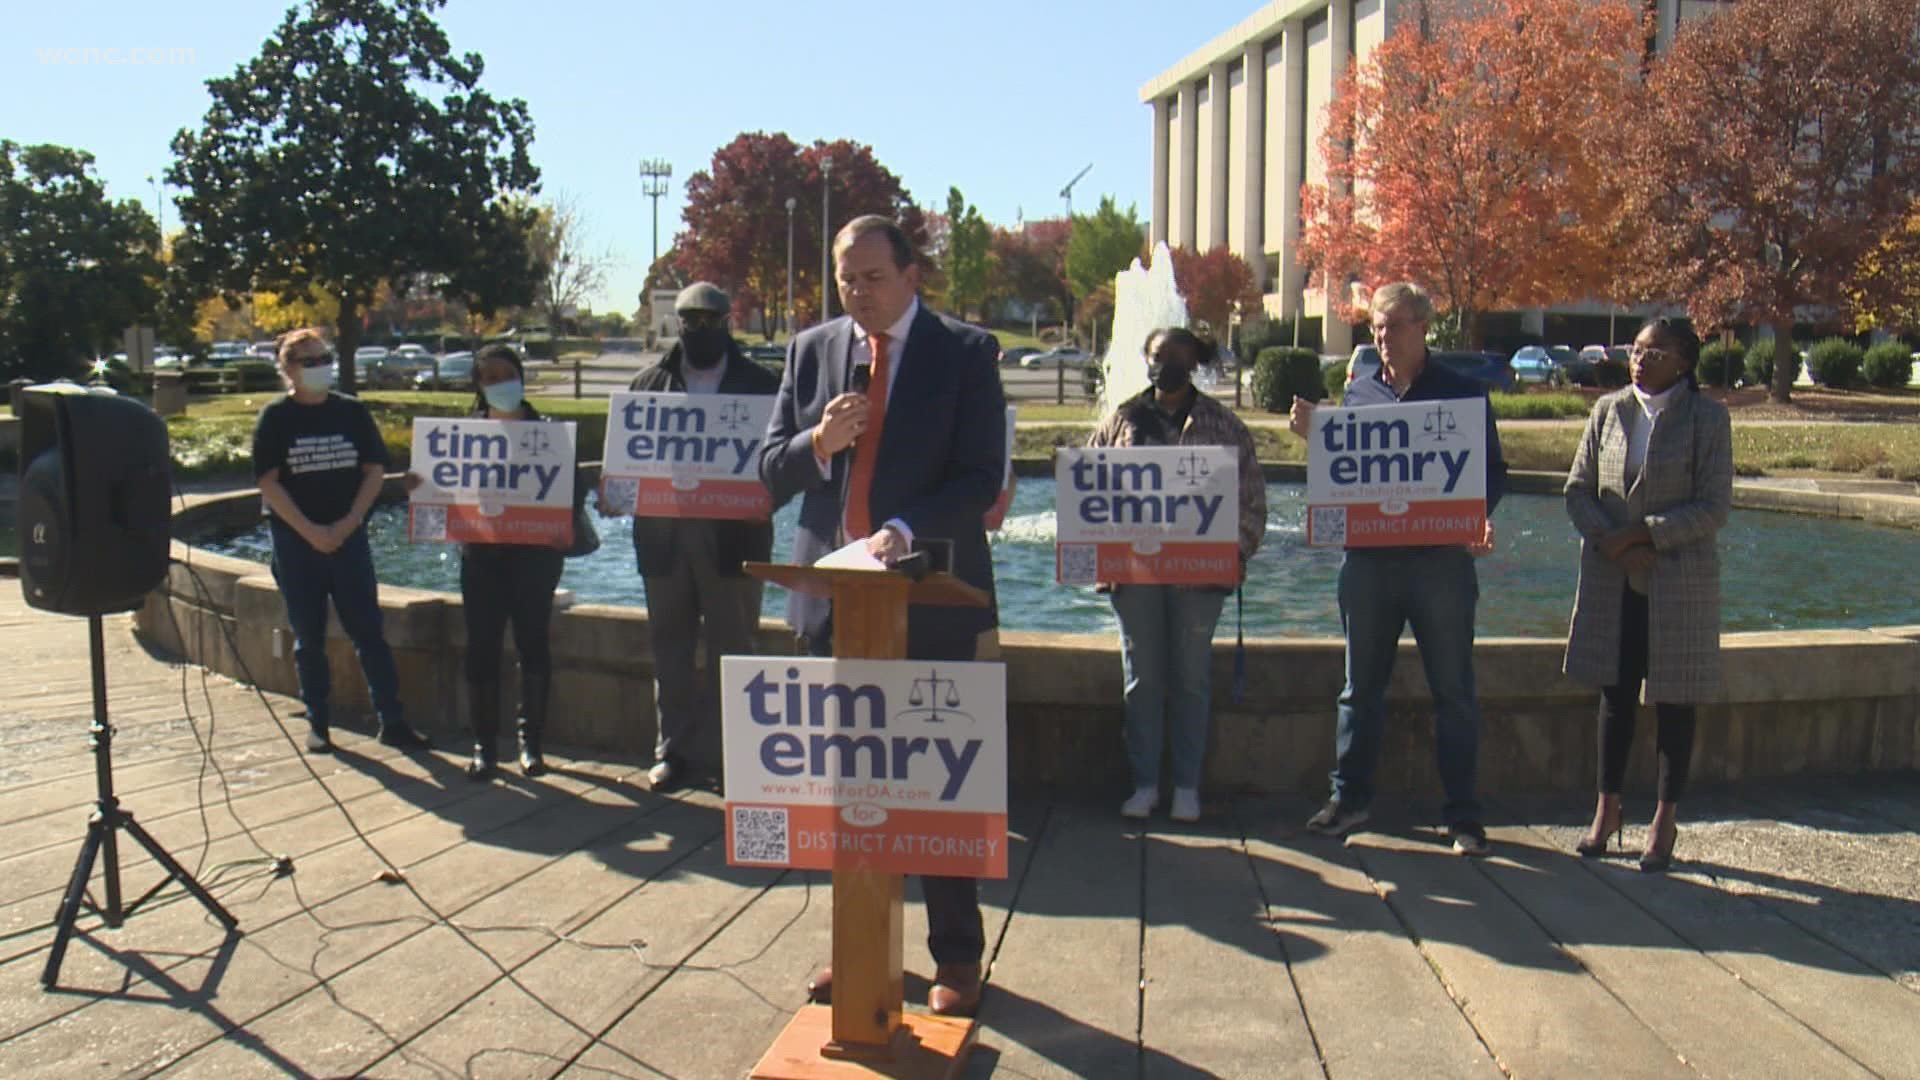 Criminal defense attorney Tim Emry said he plans to run in the primary next year against current district attorney Spencer Merriweather.